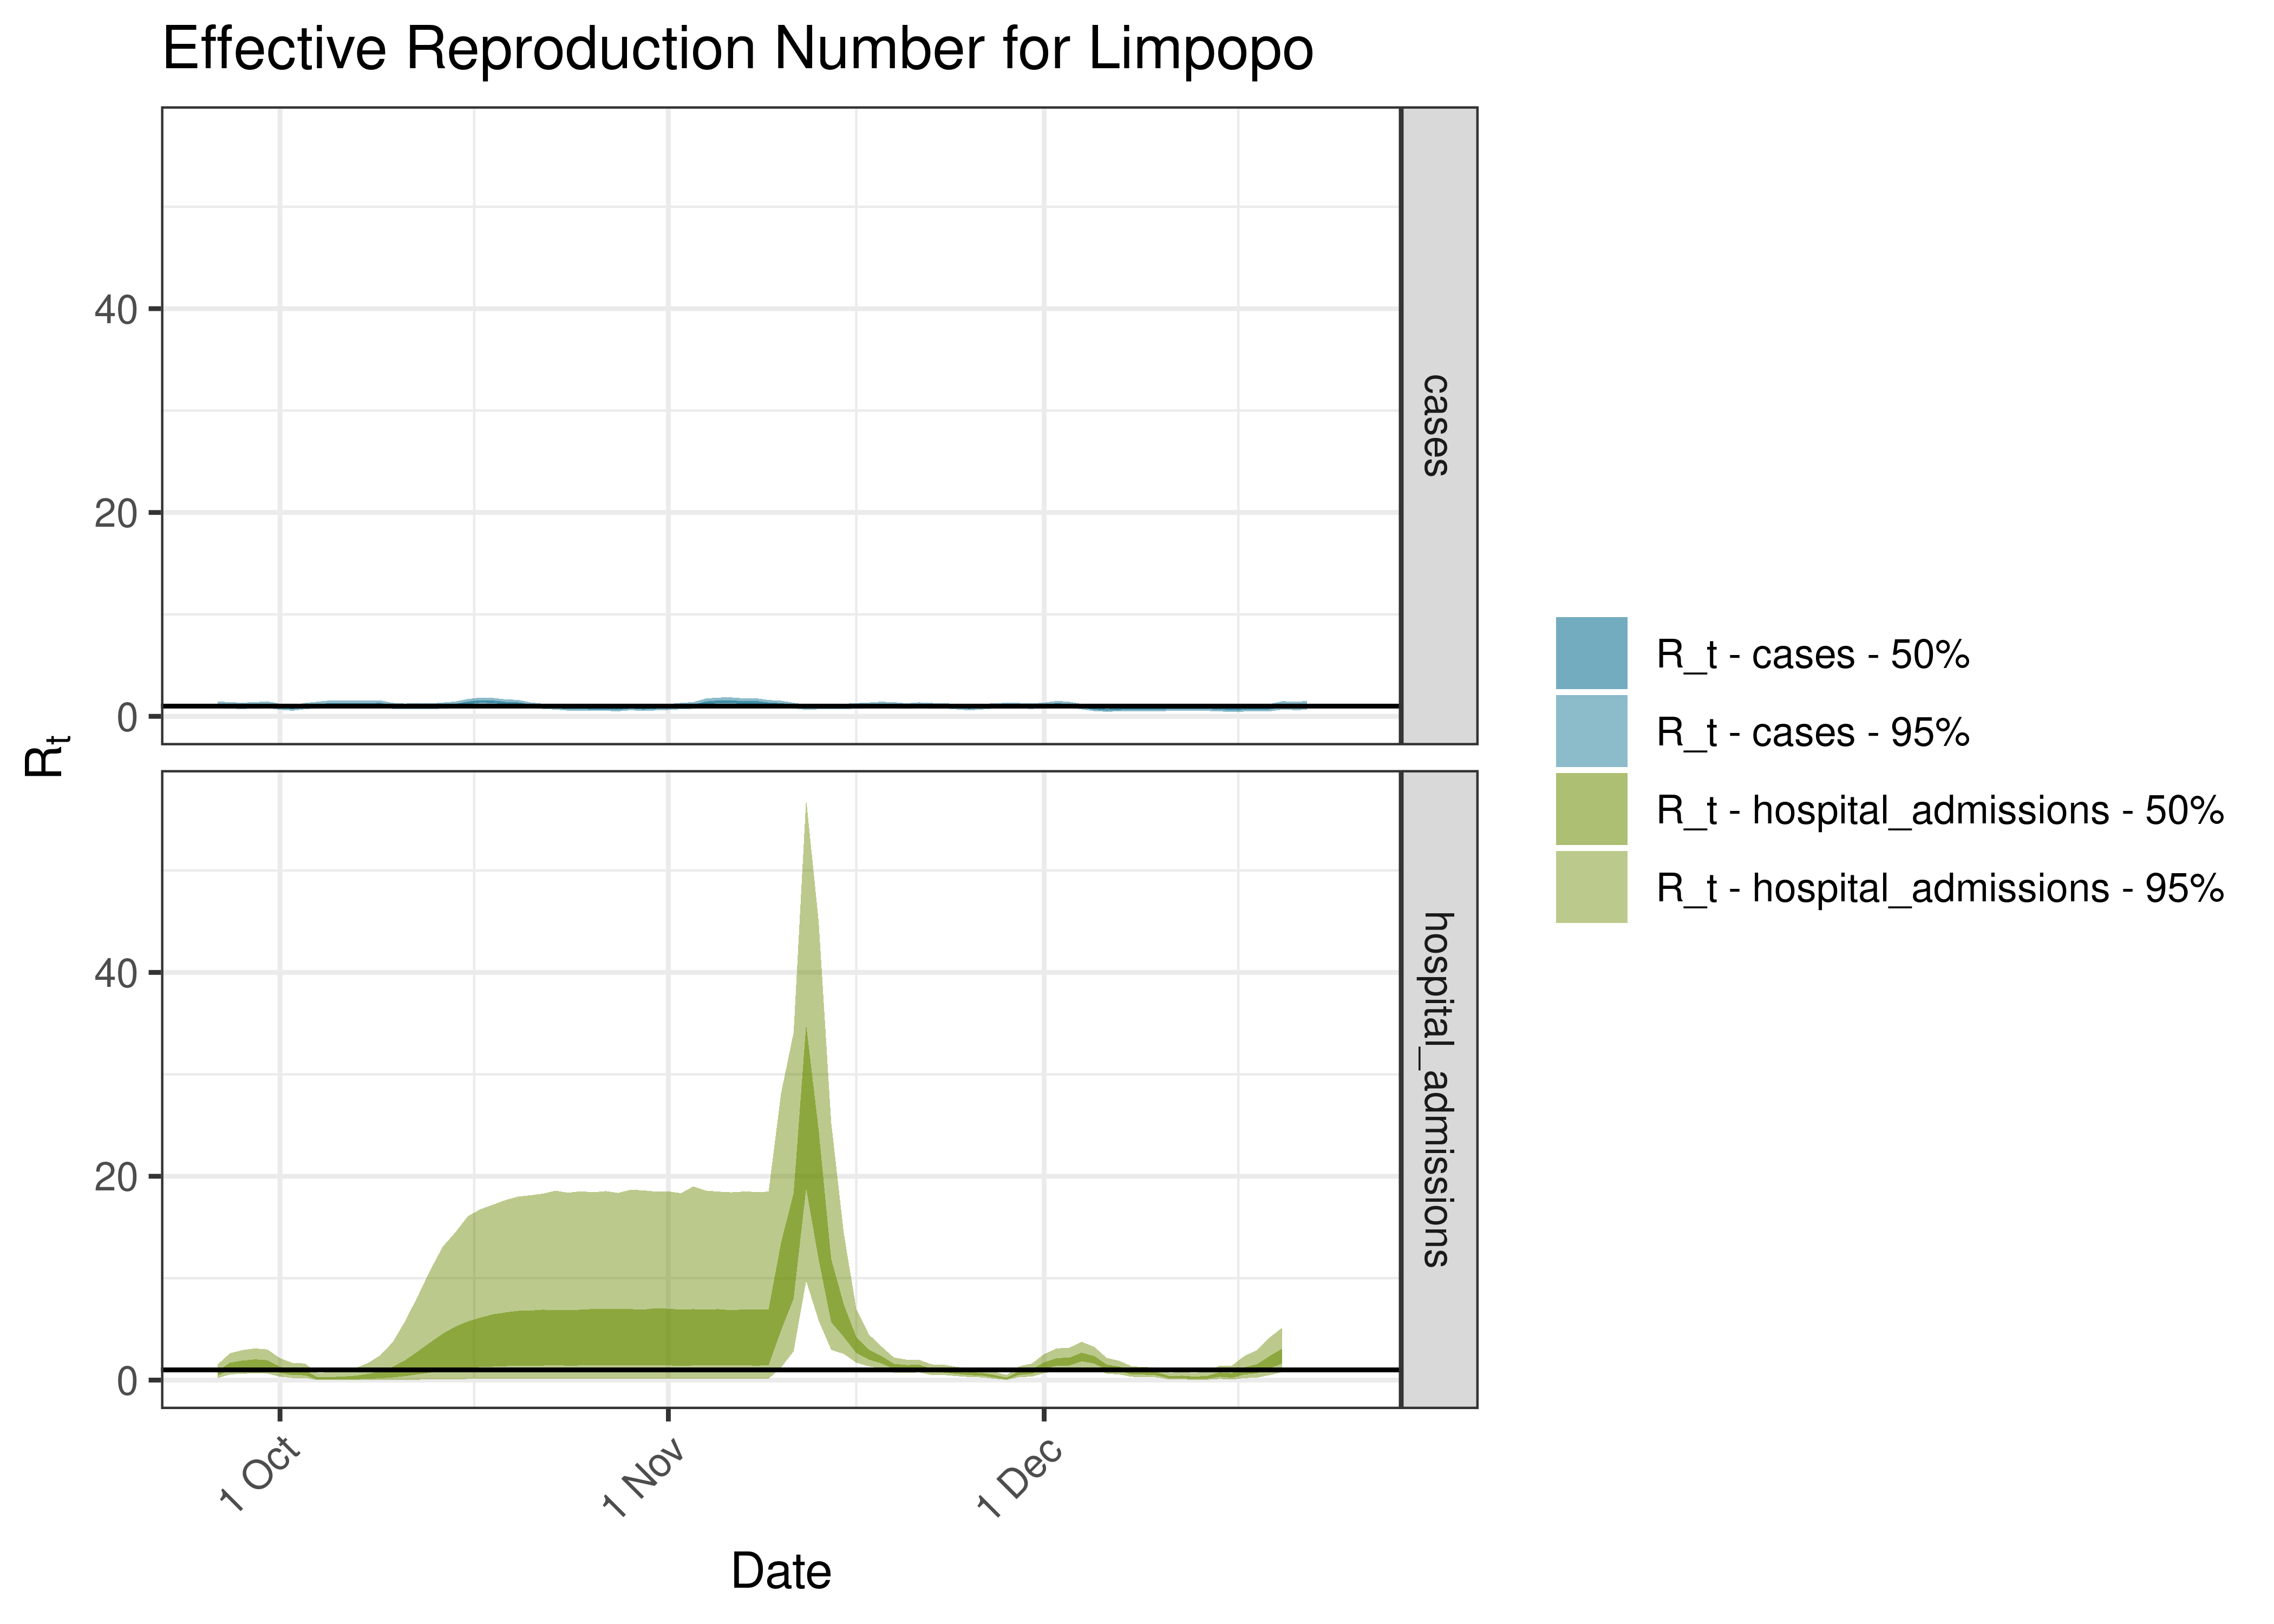 Estimated Effective Reproduction Number for Limpopo over last 90 days